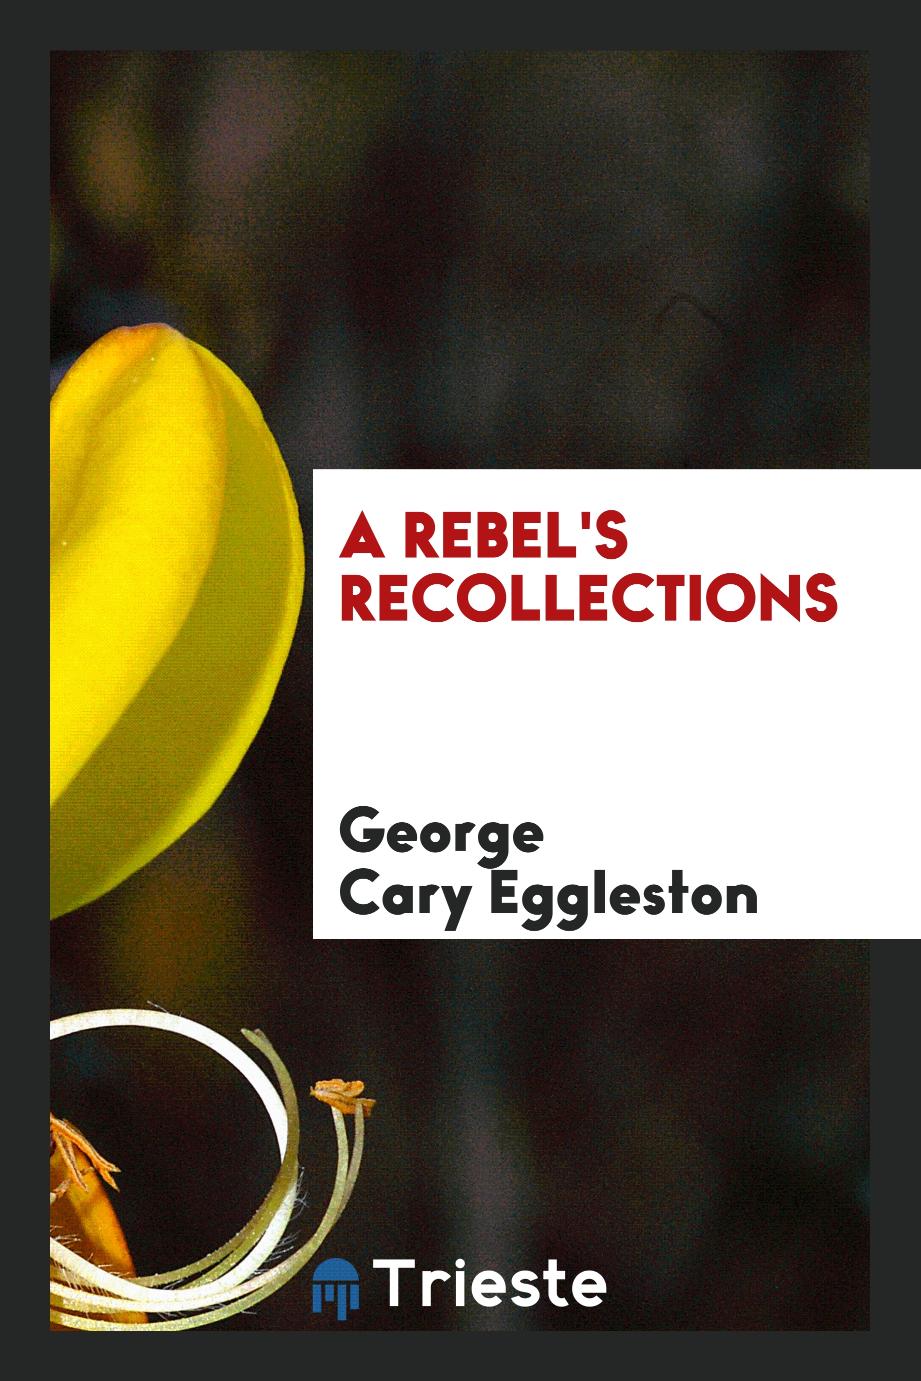 A rebel's recollections